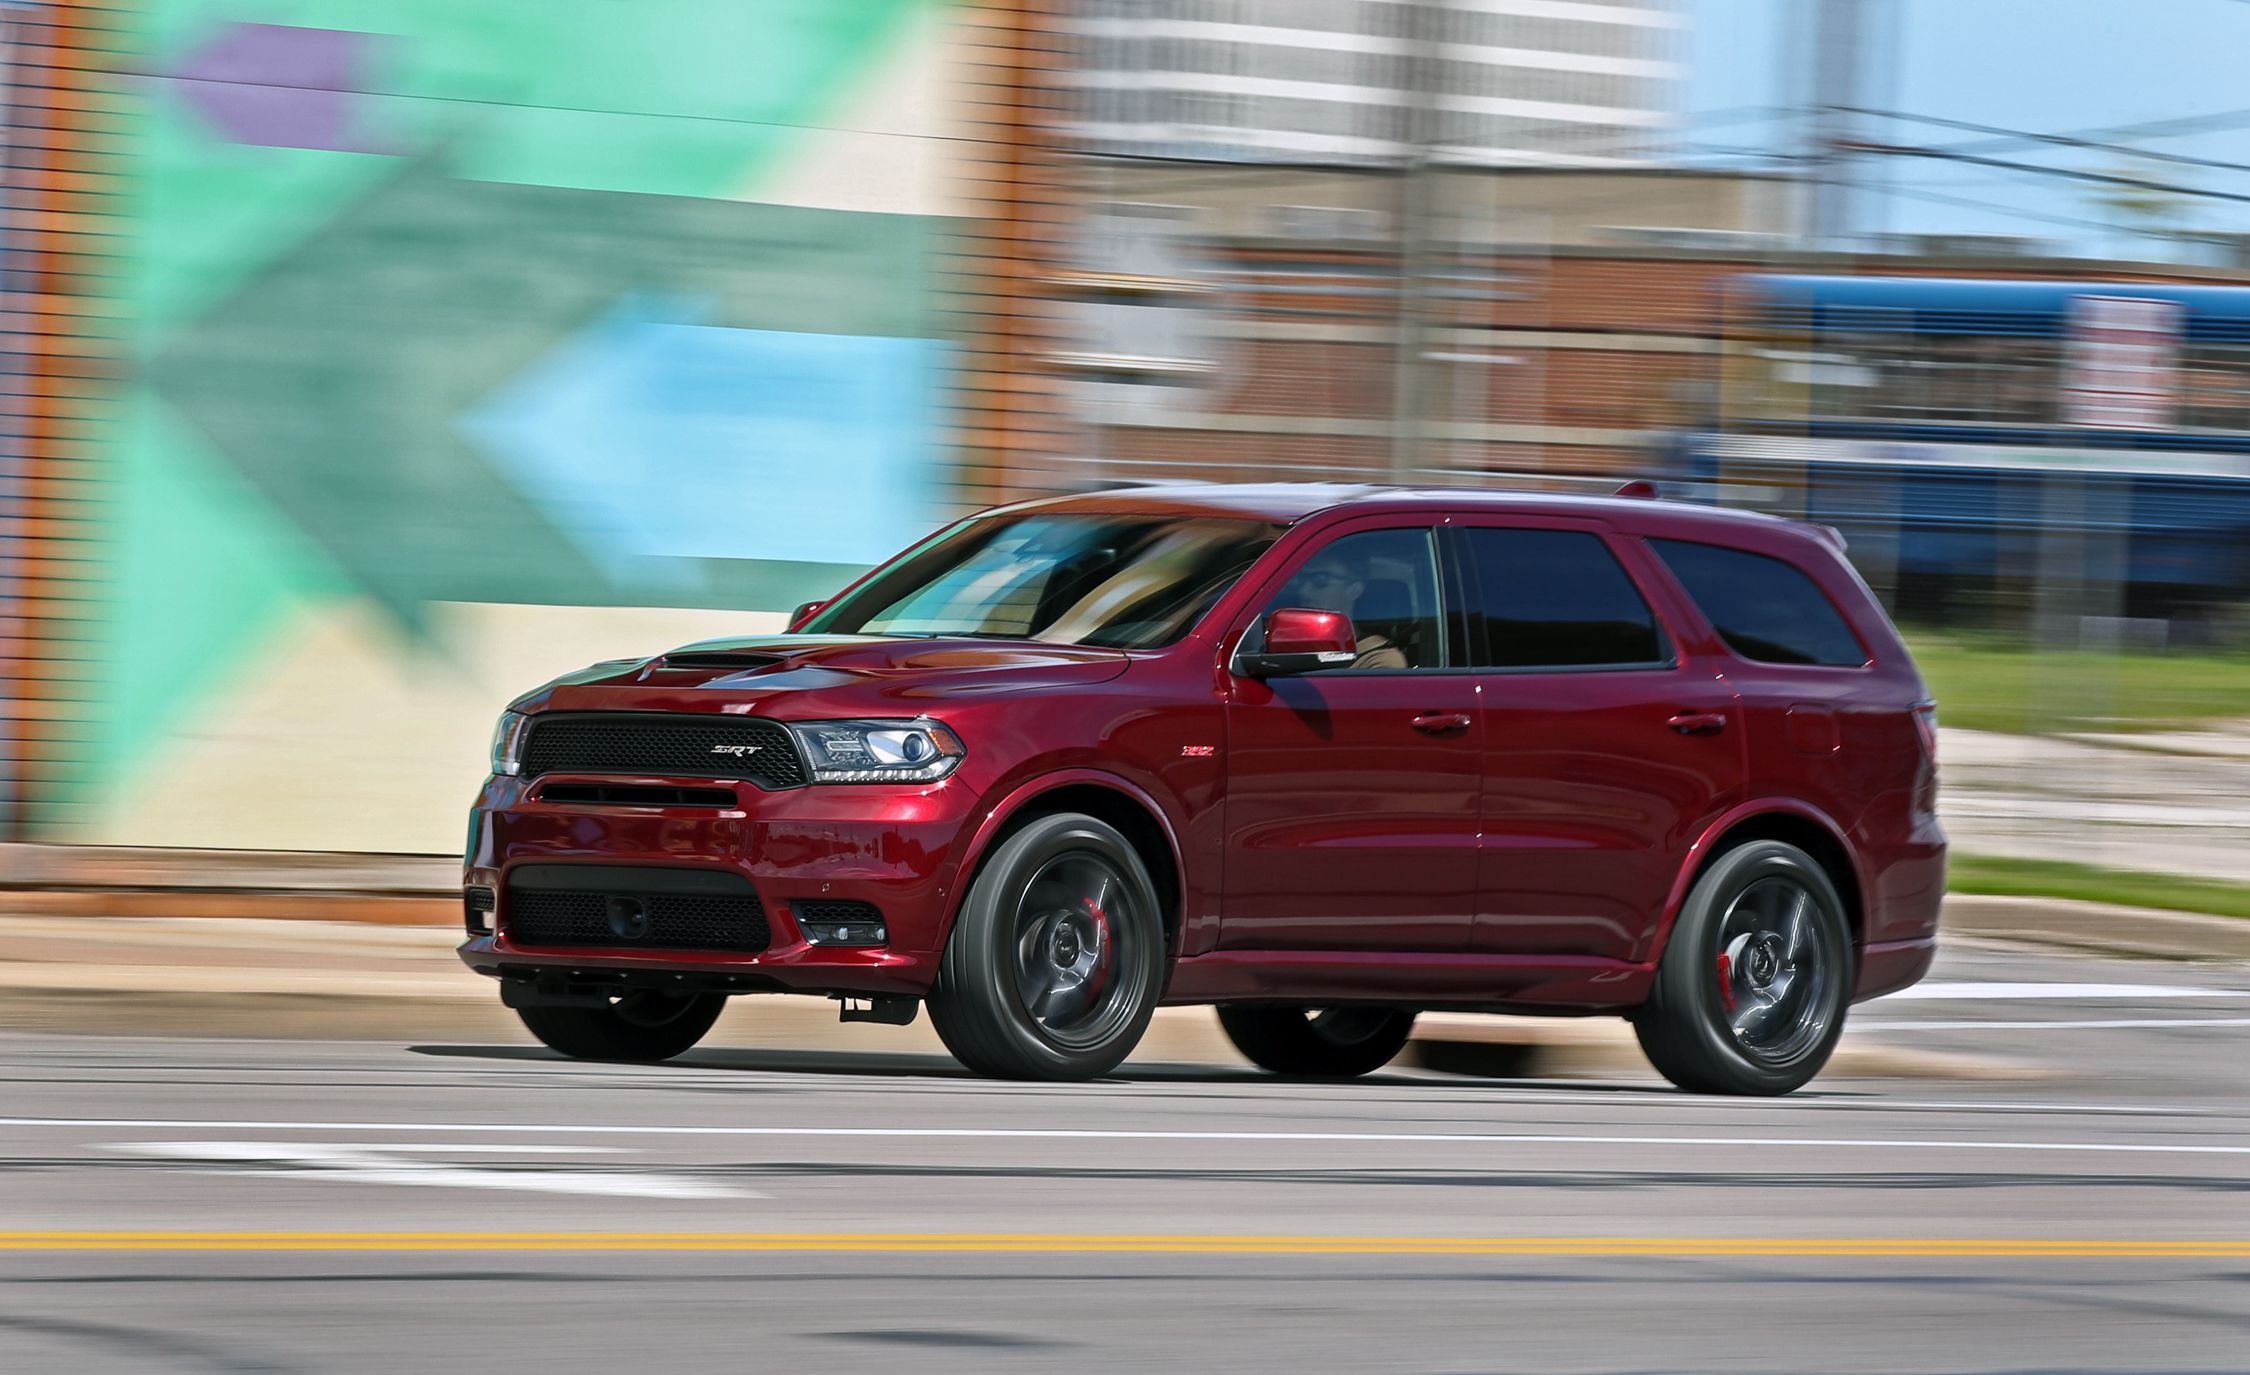 2019 Dodge Durango SRT Review, Pricing, and Specs